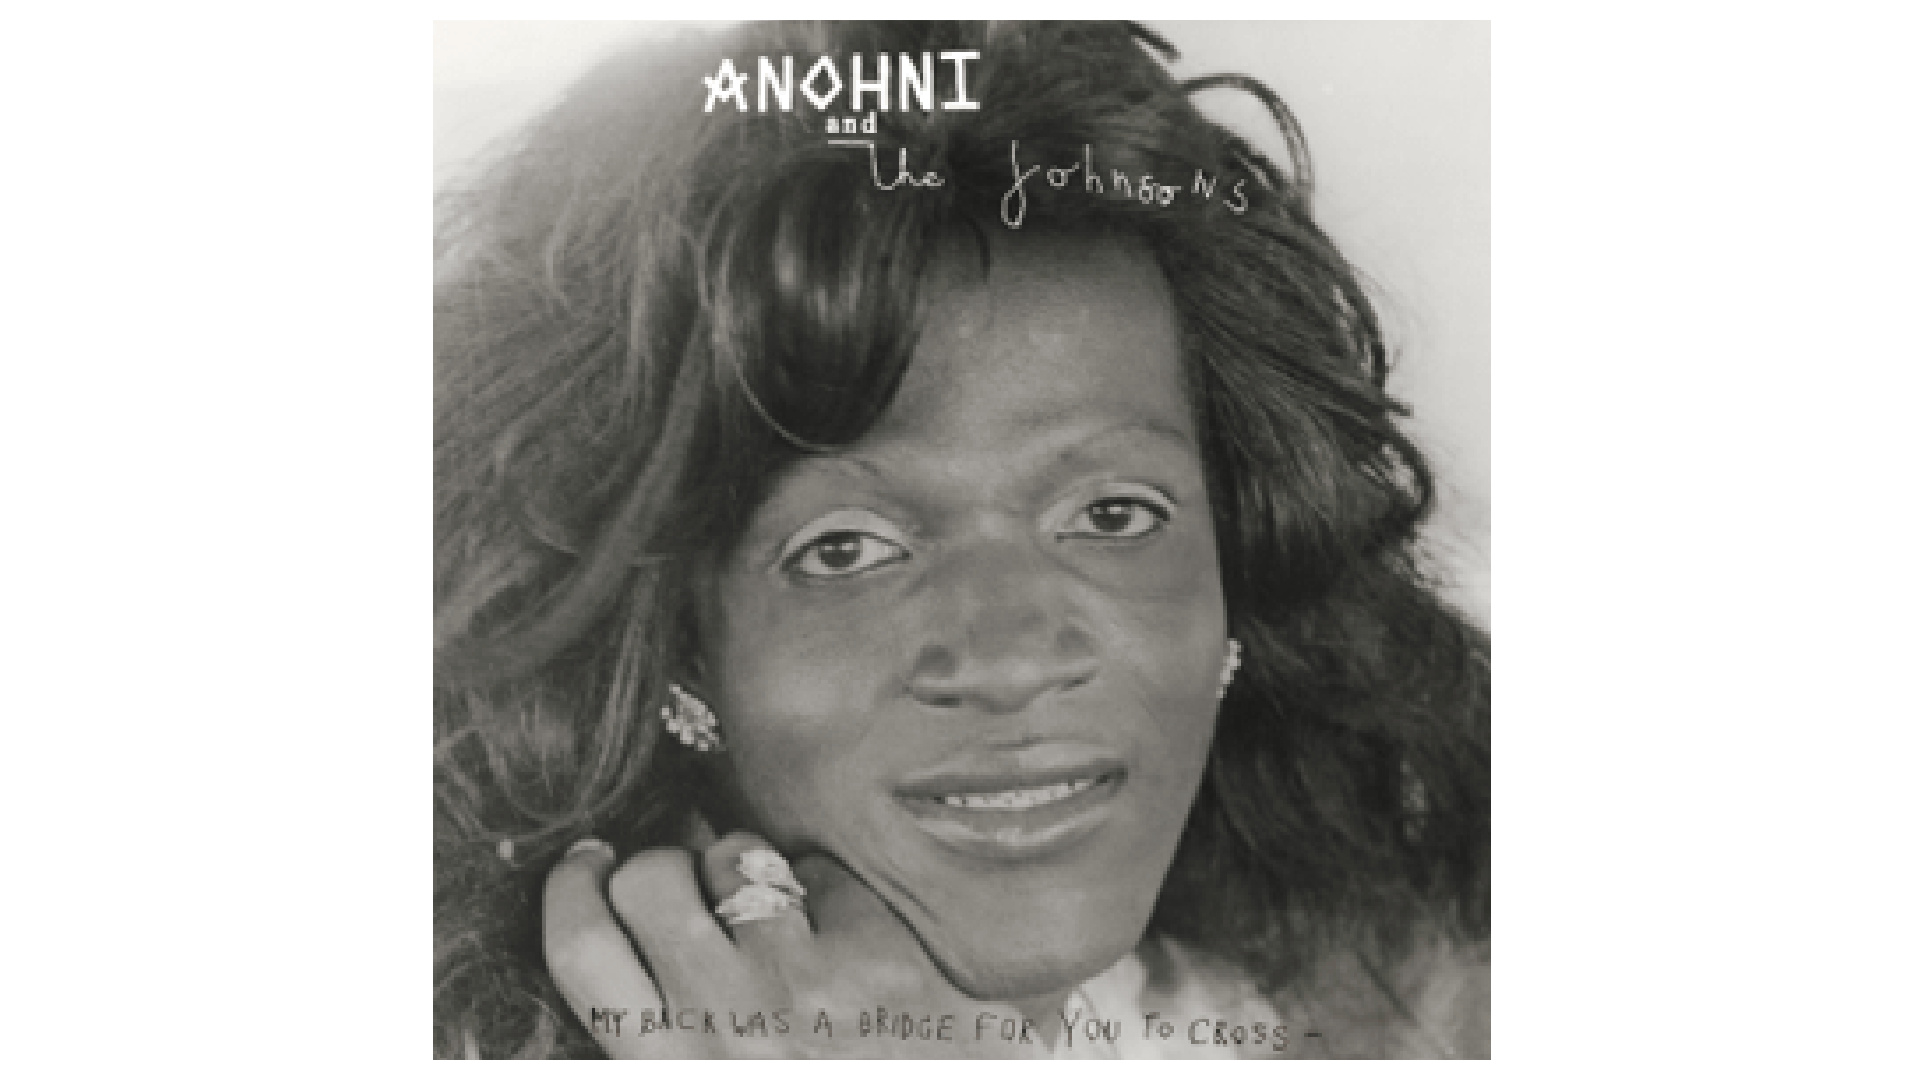 ANOHNI and the Johnsons - 'My Back Was a Bridge for You to Cross'